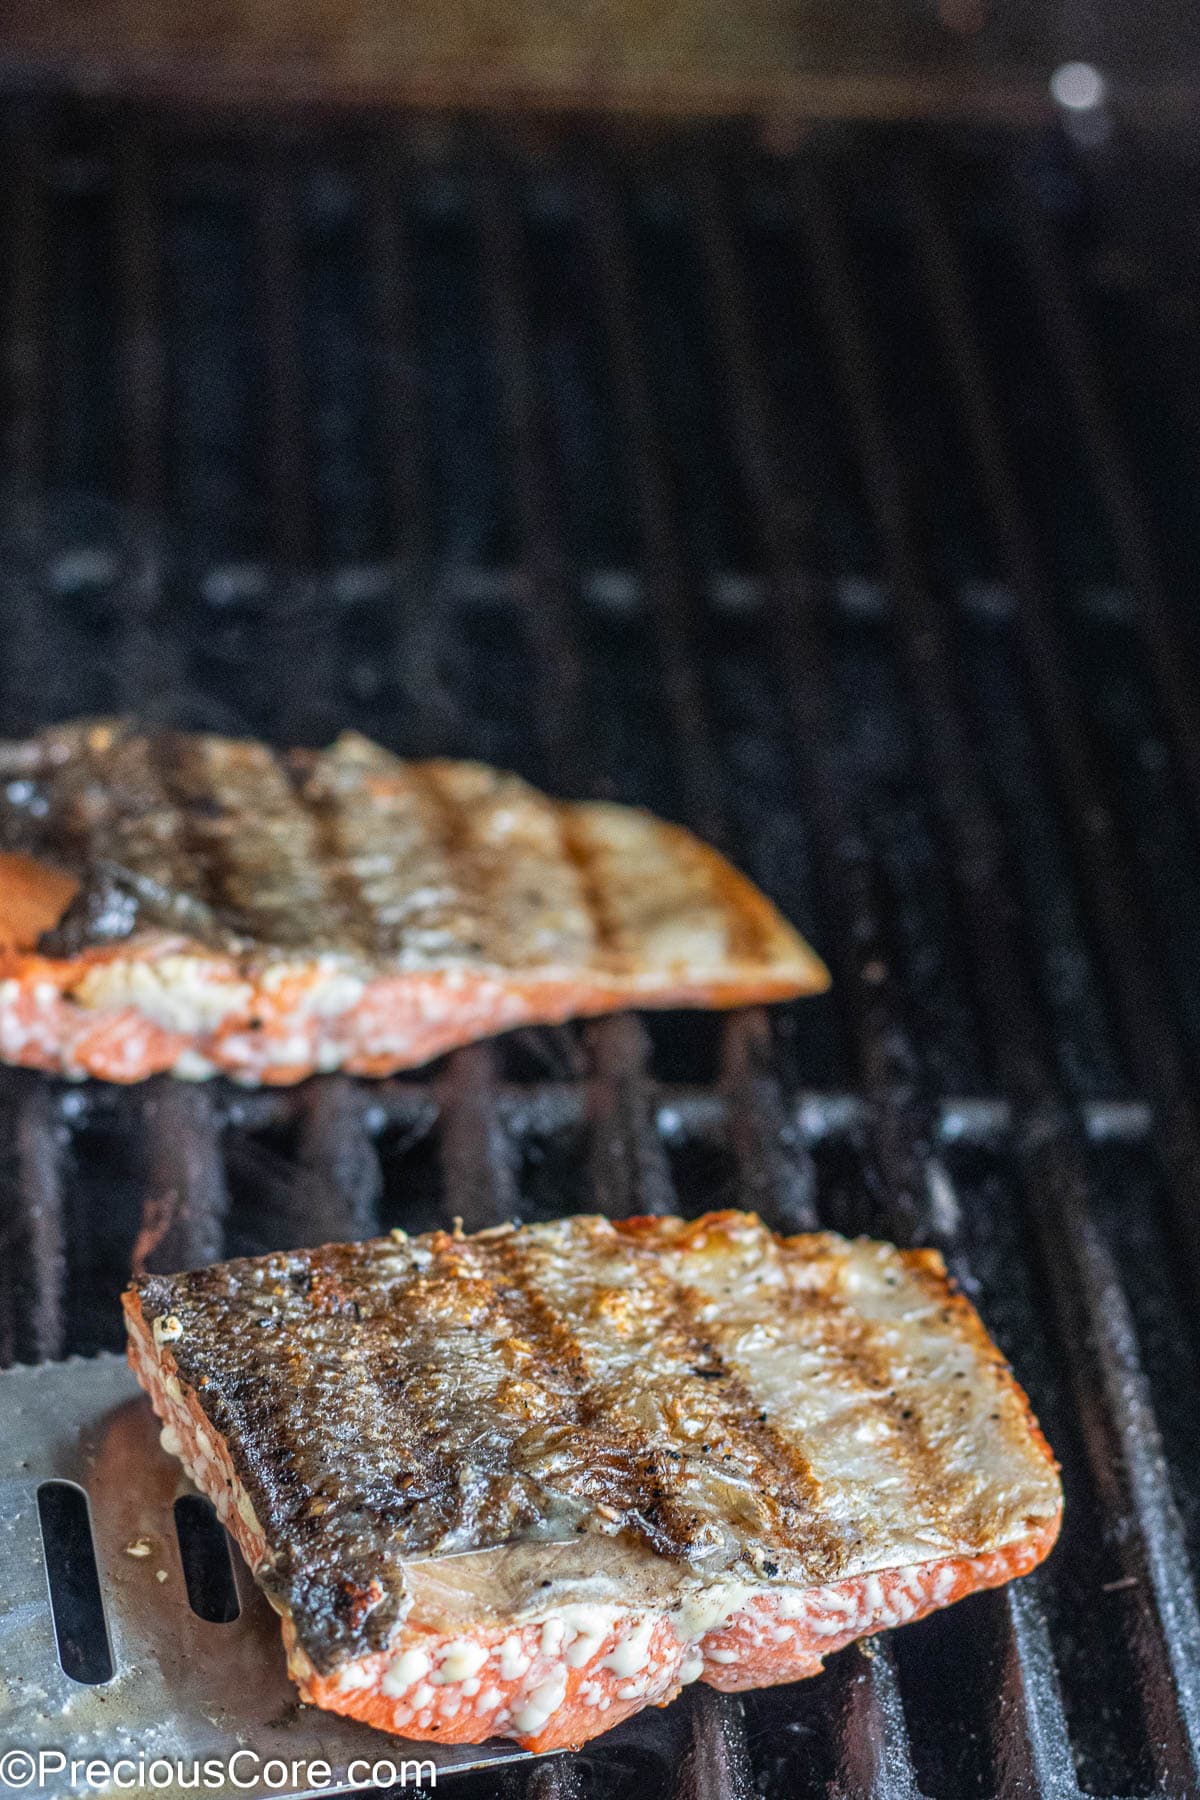 Skin-on sockeye salmon with grill marks on a grill.